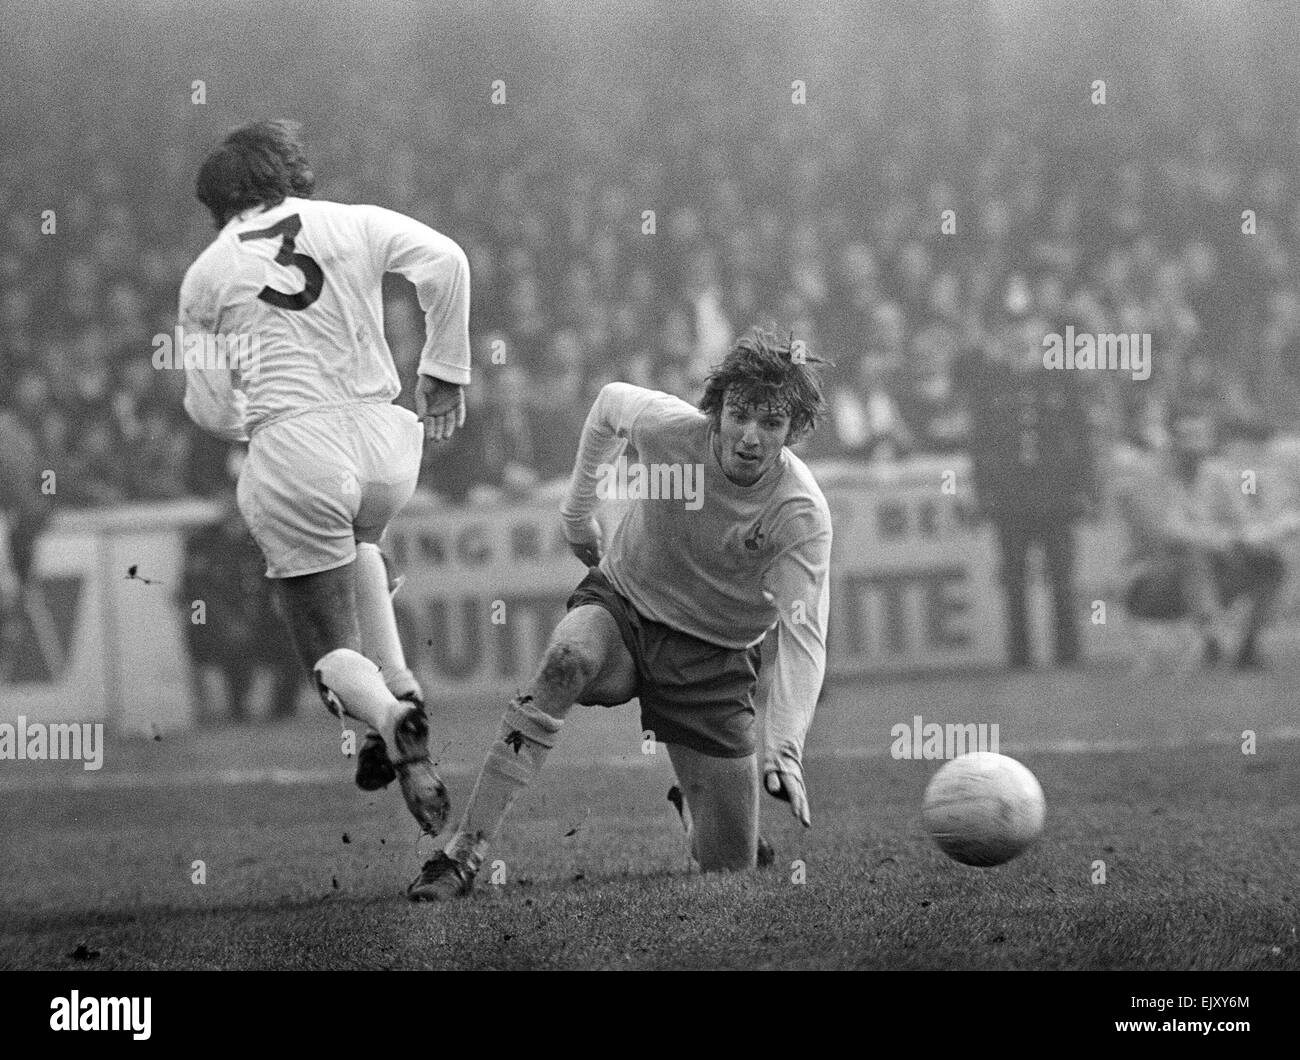 FA Cup Quarter Final match at Elland Road. Leeds United 2 v Tottenham Hotspur 1. Action during the match. 18th March 1972. Stock Photo